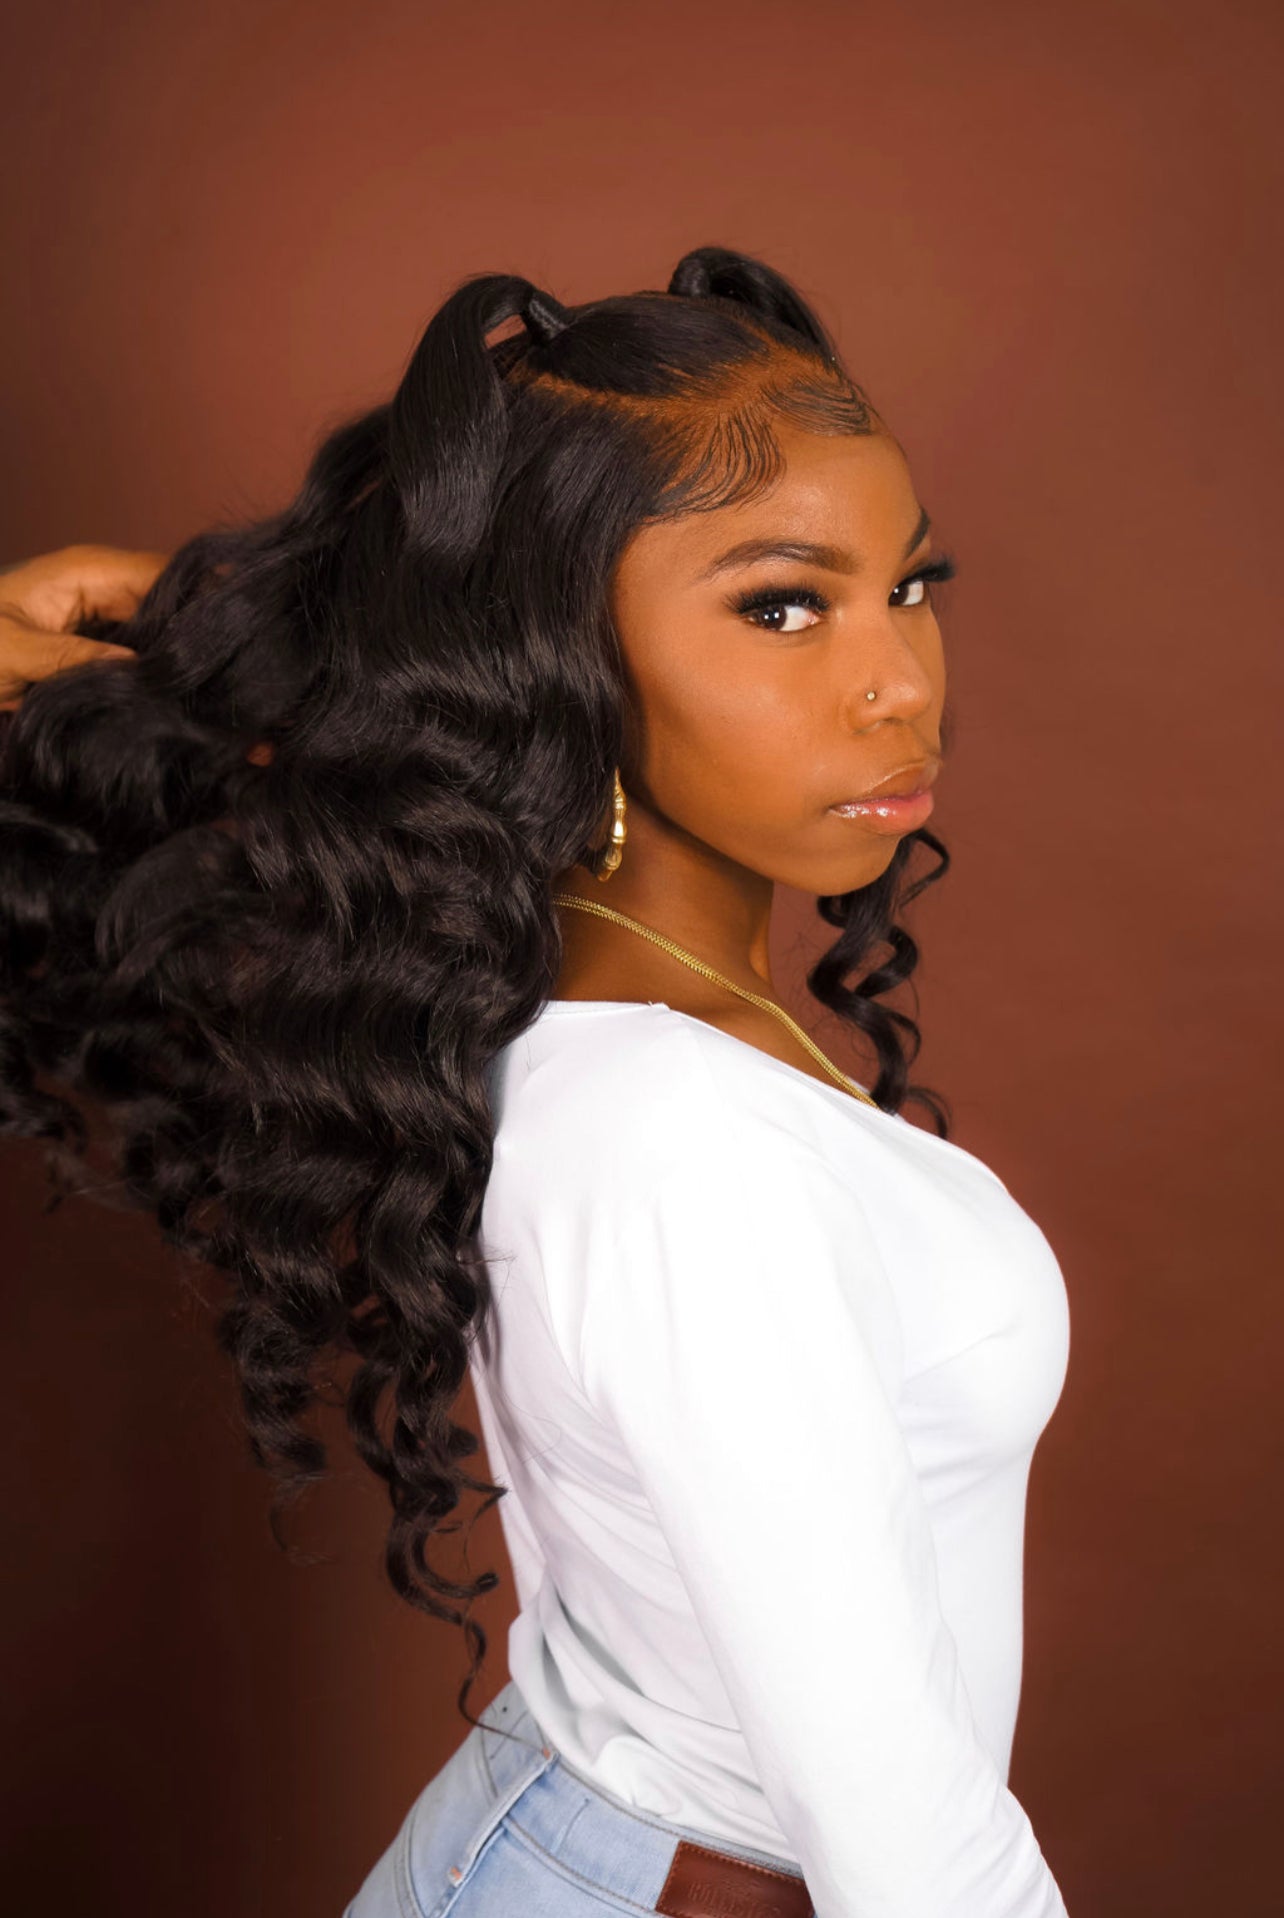 Frontal Wig/Weave Install 1-on-1 Class – The Gift 2 Grow